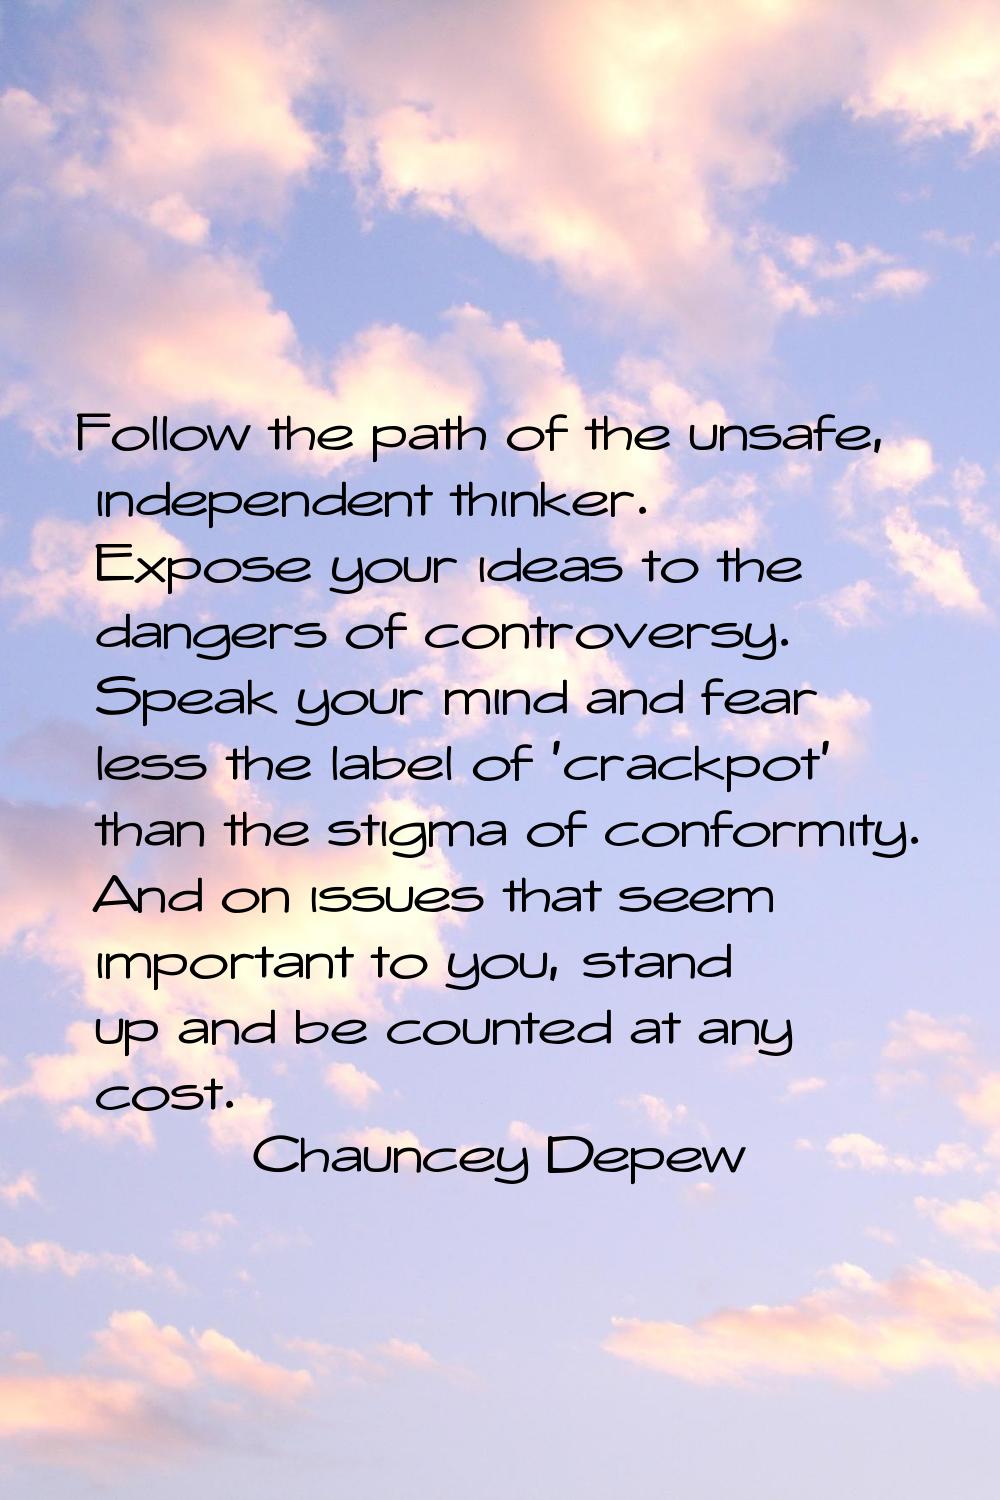 Follow the path of the unsafe, independent thinker. Expose your ideas to the dangers of controversy